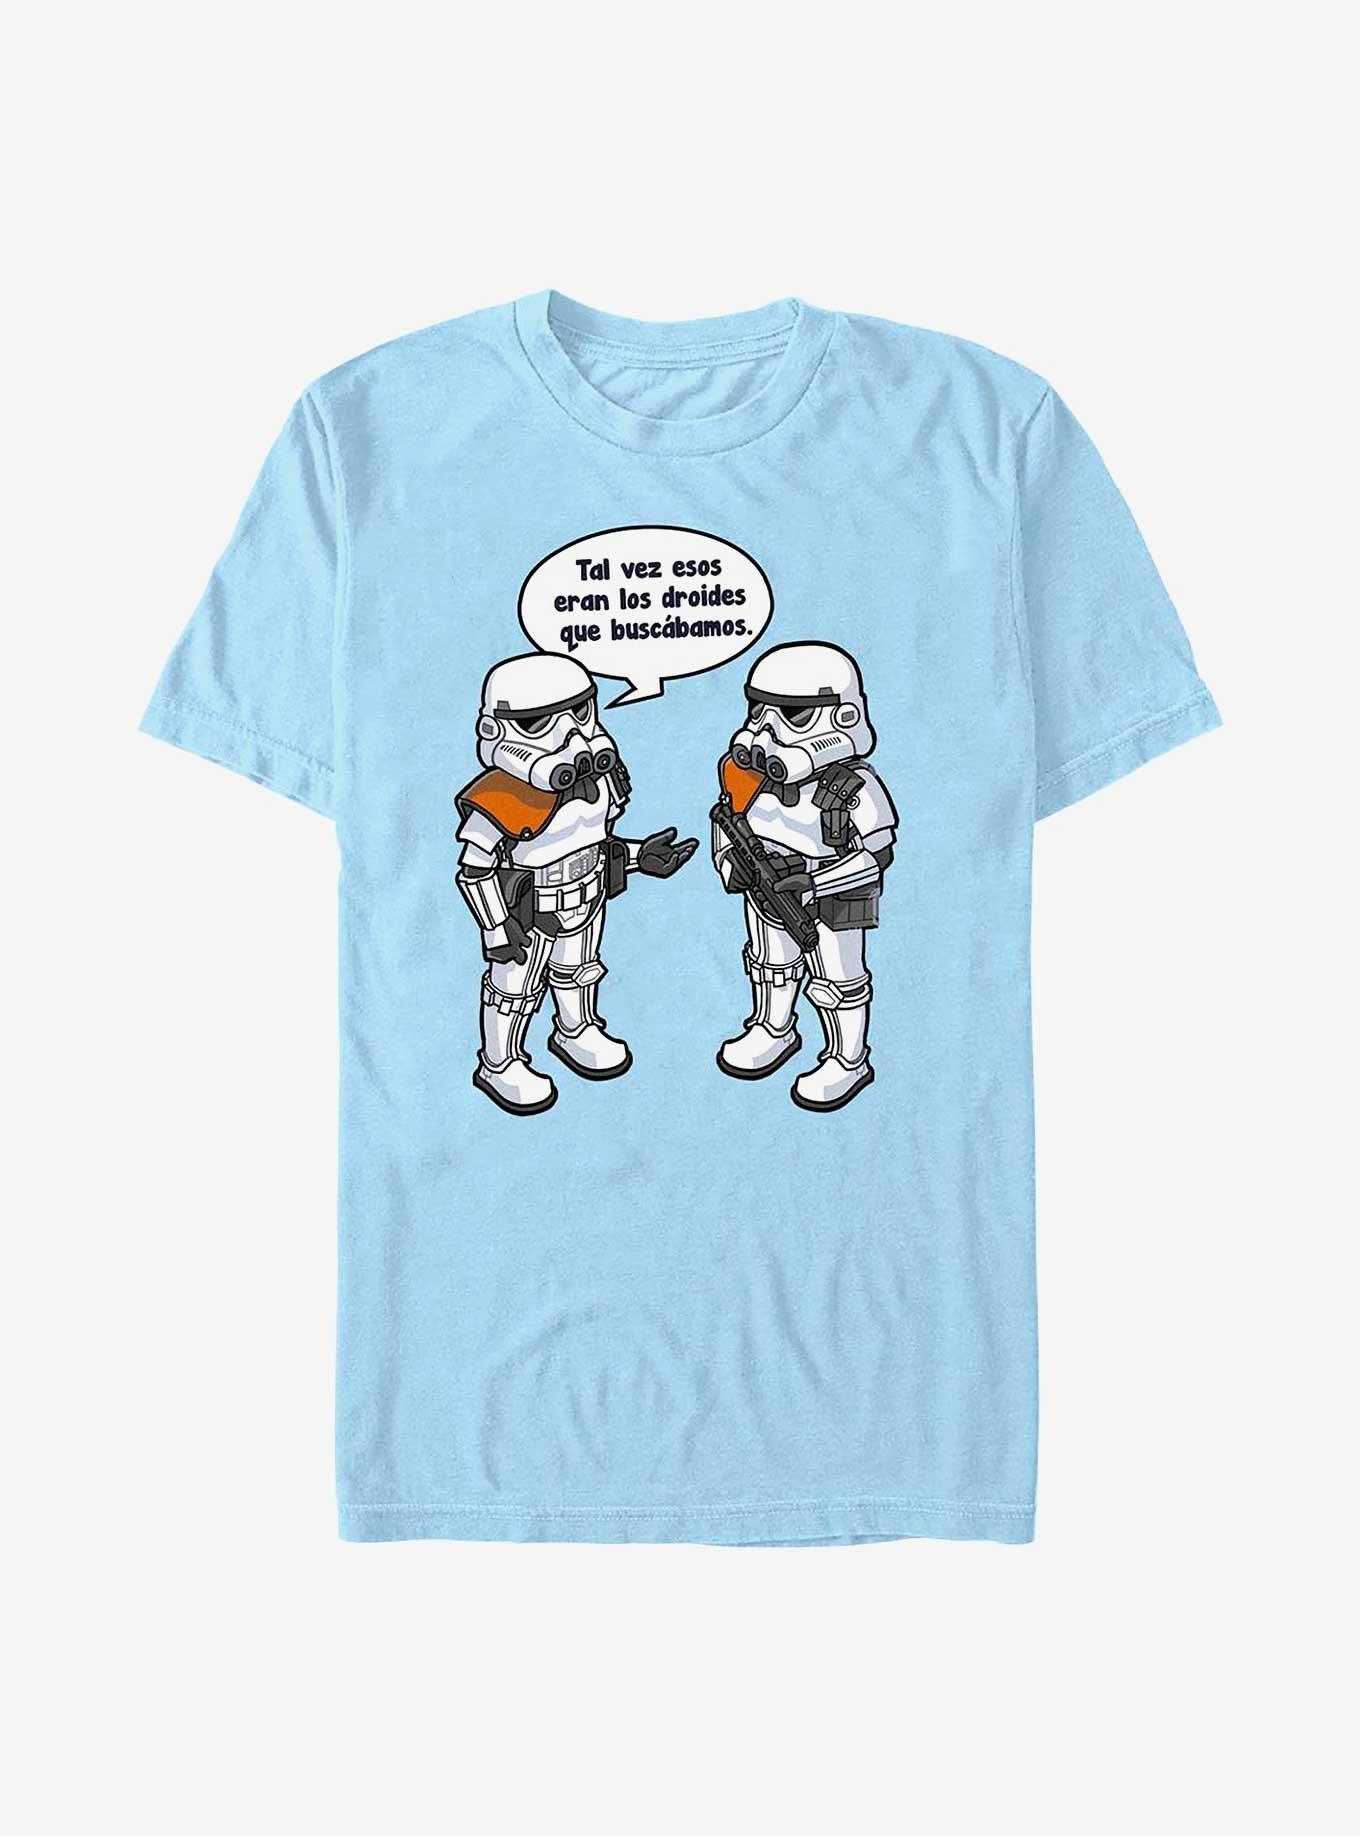 Star Wars Looking For Droids Spanish T-Shirt, LT BLUE, hi-res